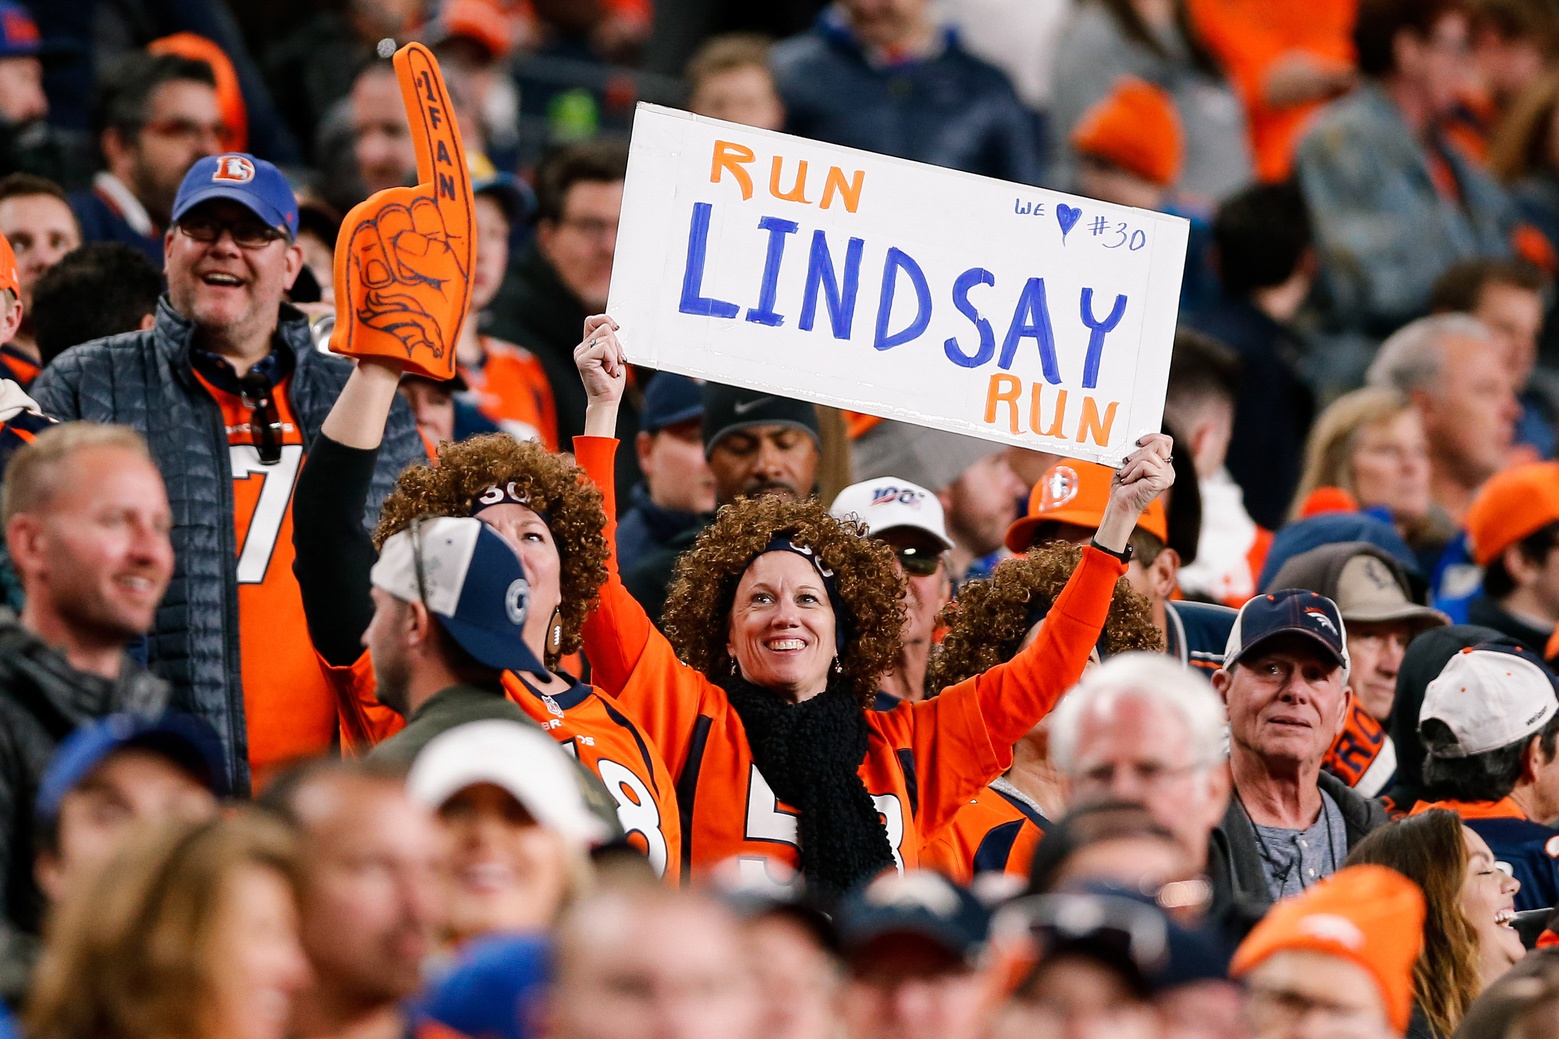 A woman wearing a wig resembling Denver Broncos running back Phillip Lindsay's hair holds a sign reading "Run Lindsay Run."